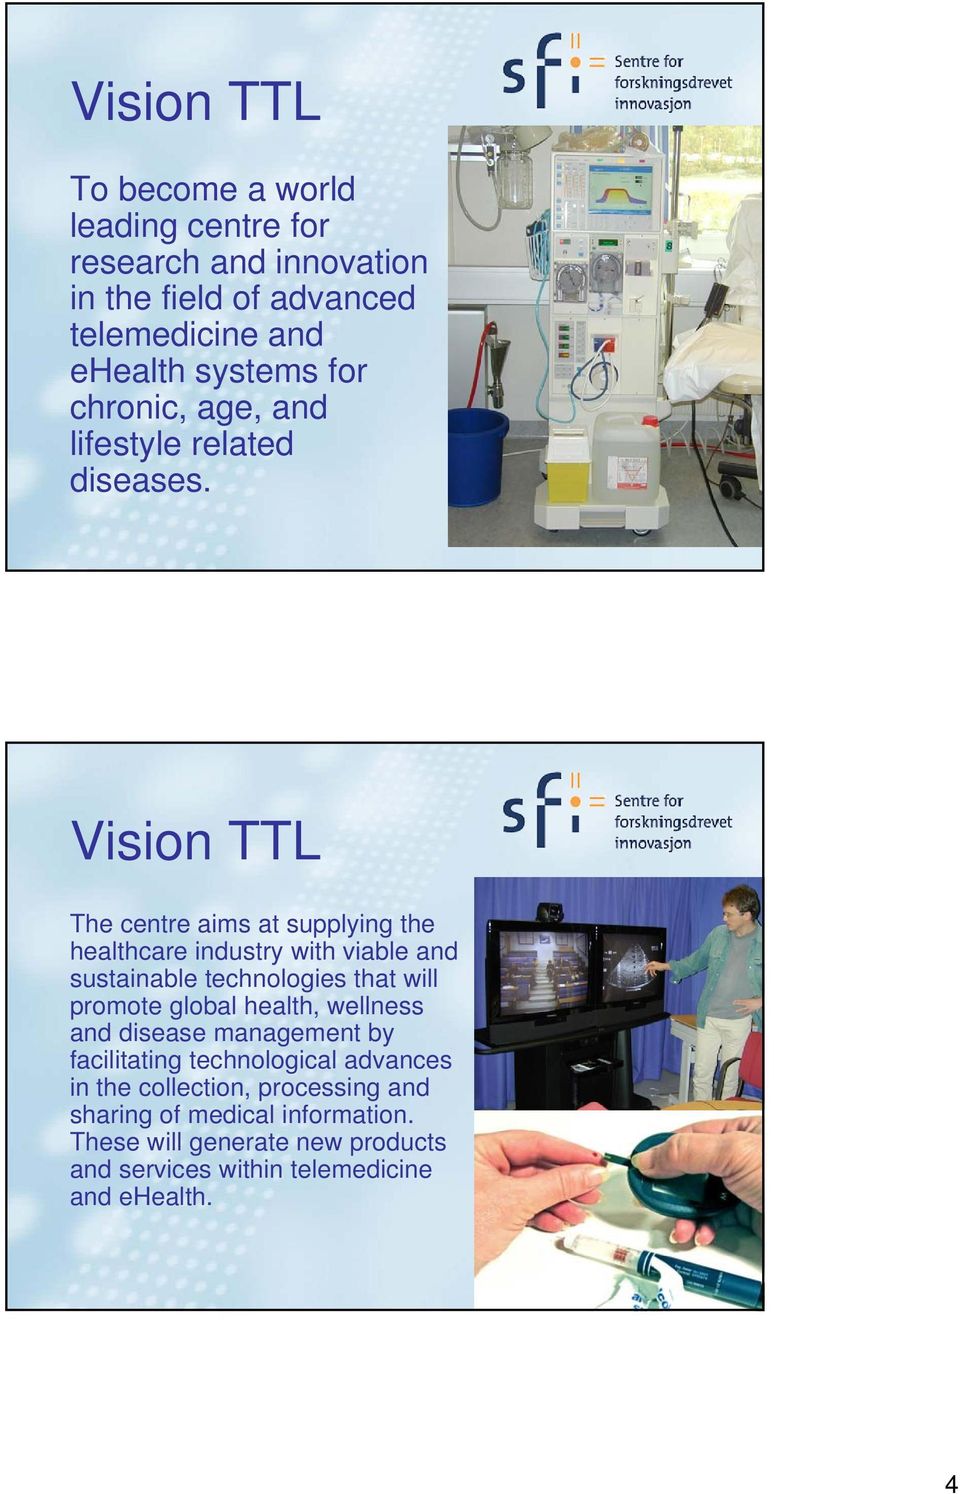 Vision TTL The centre aims at supplying the healthcare industry with viable and sustainable technologies that will promote global